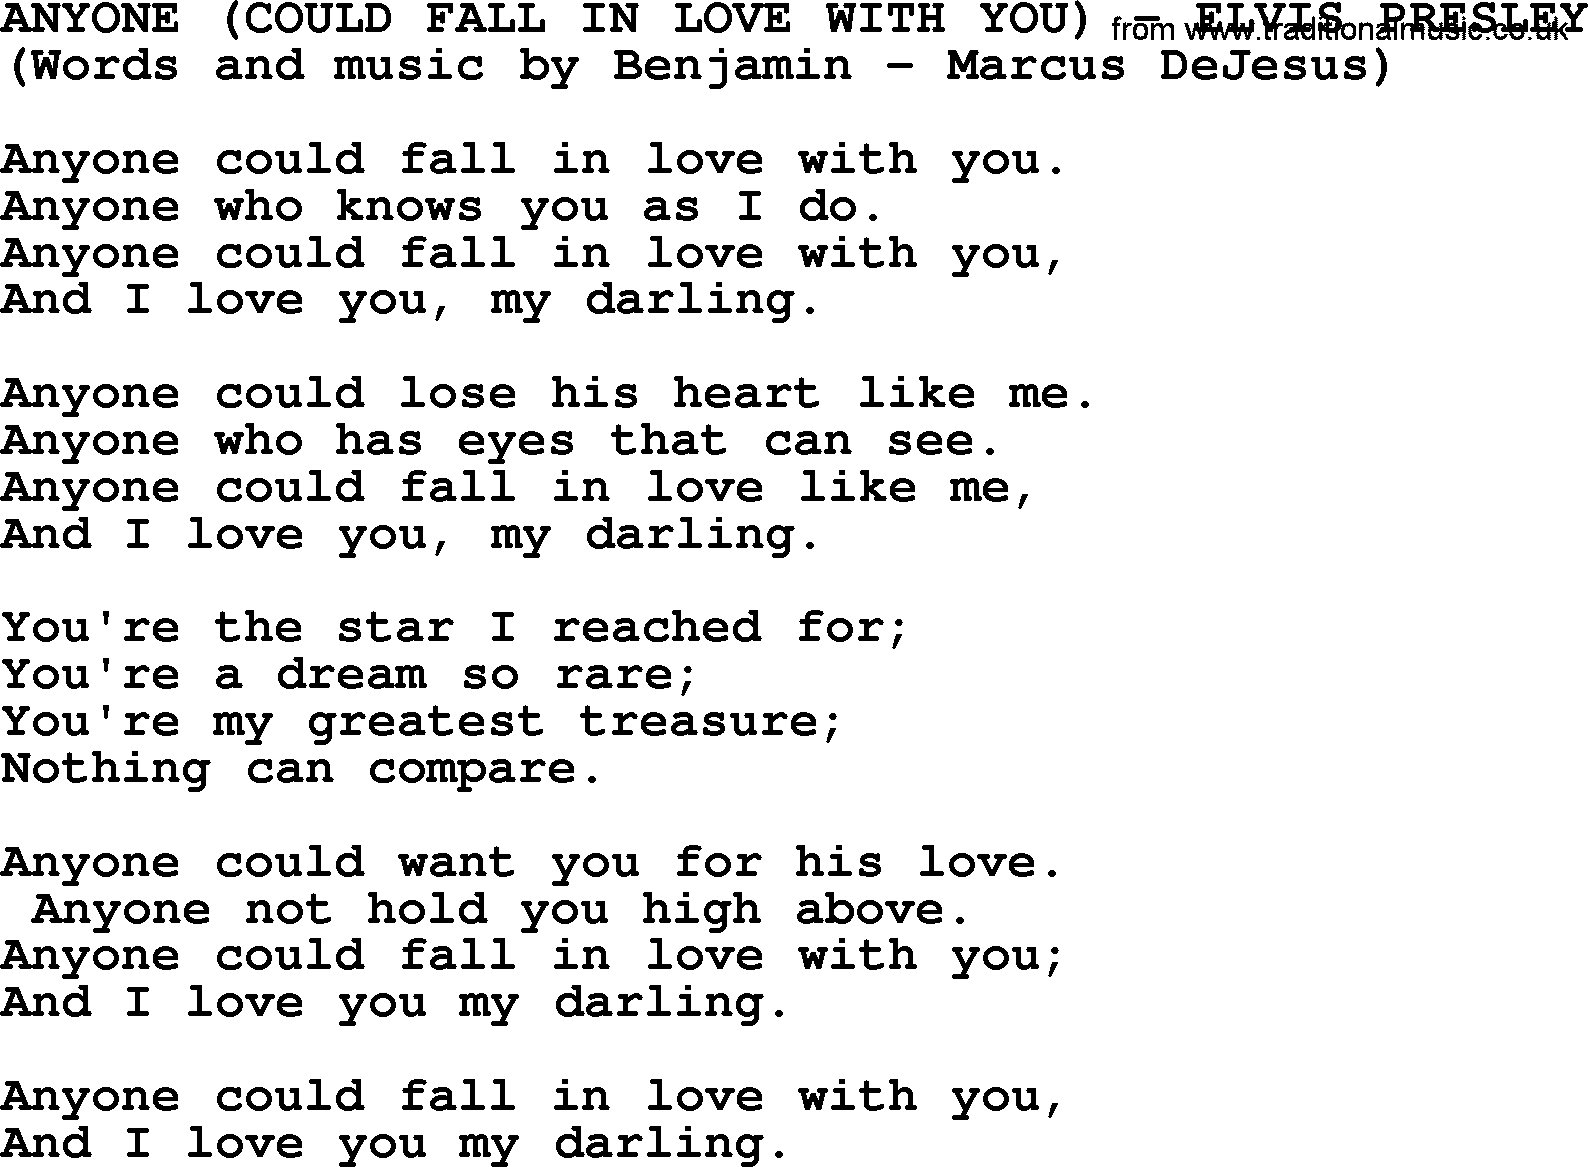 Elvis Presley song: Anyone Could Fall In Love With You lyrics